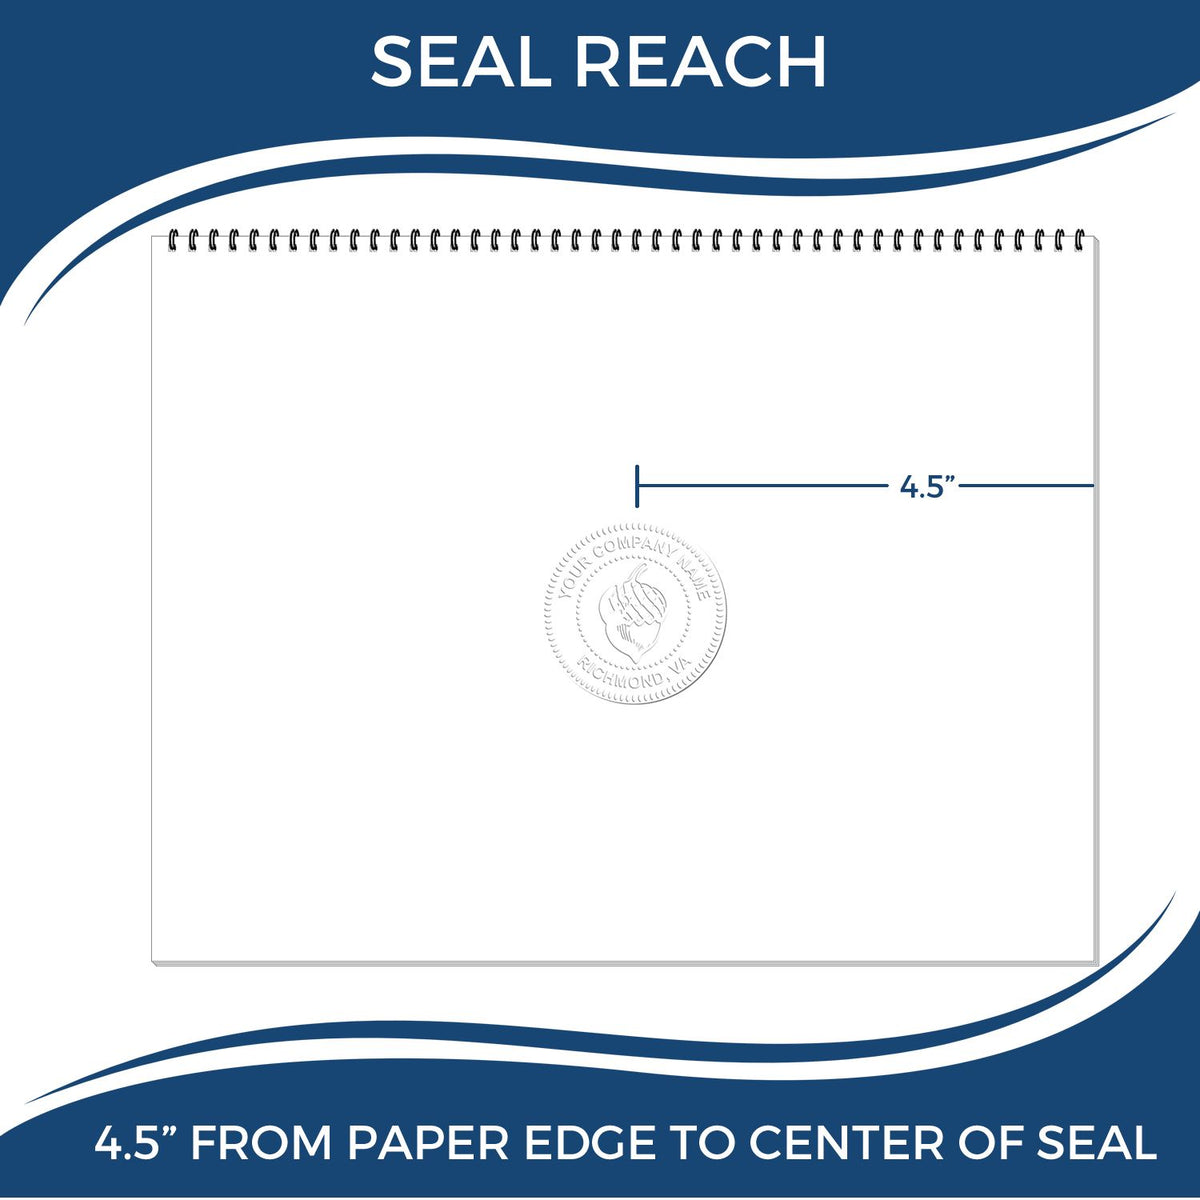 An infographic showing the seal reach which is represented by a ruler and a miniature seal image of the State of New Hampshire Extended Long Reach Engineer Seal